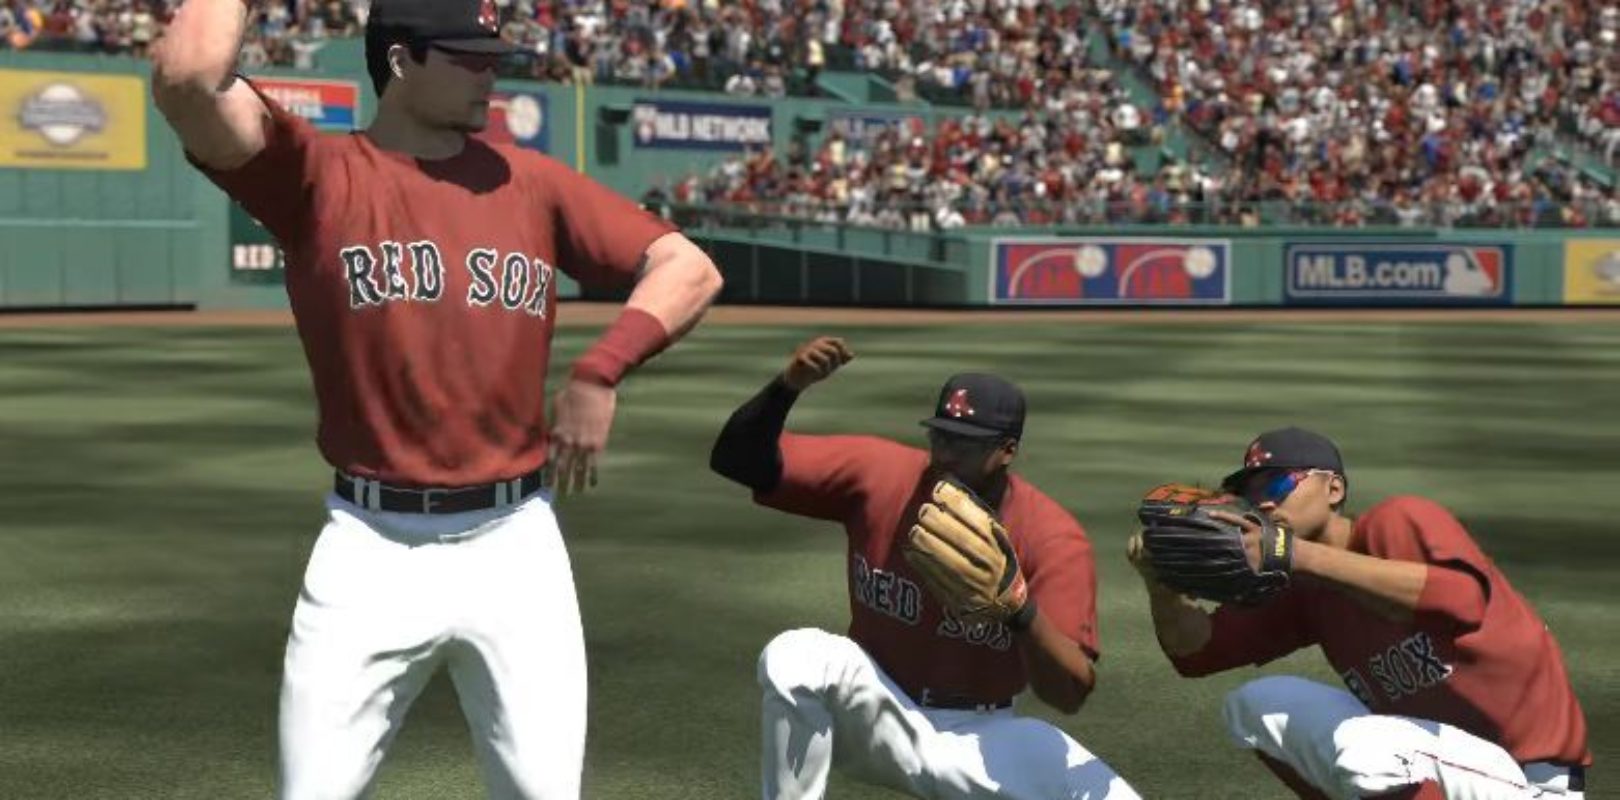 mlb the show 17 ps4 review